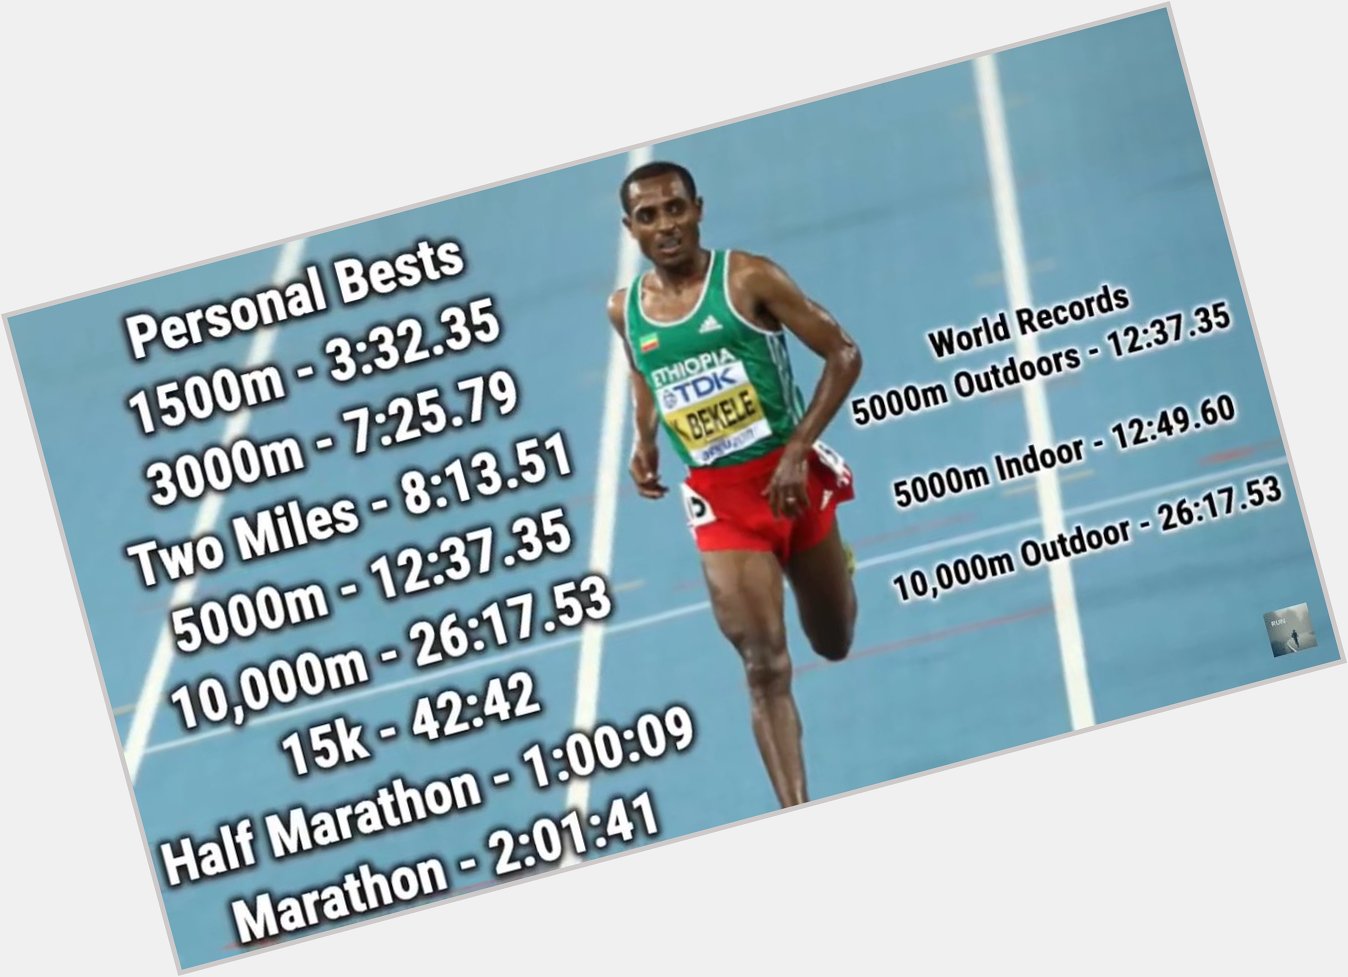 Happy Birthday to one of the greatest athletes of all time. Kenenisa Bekele  